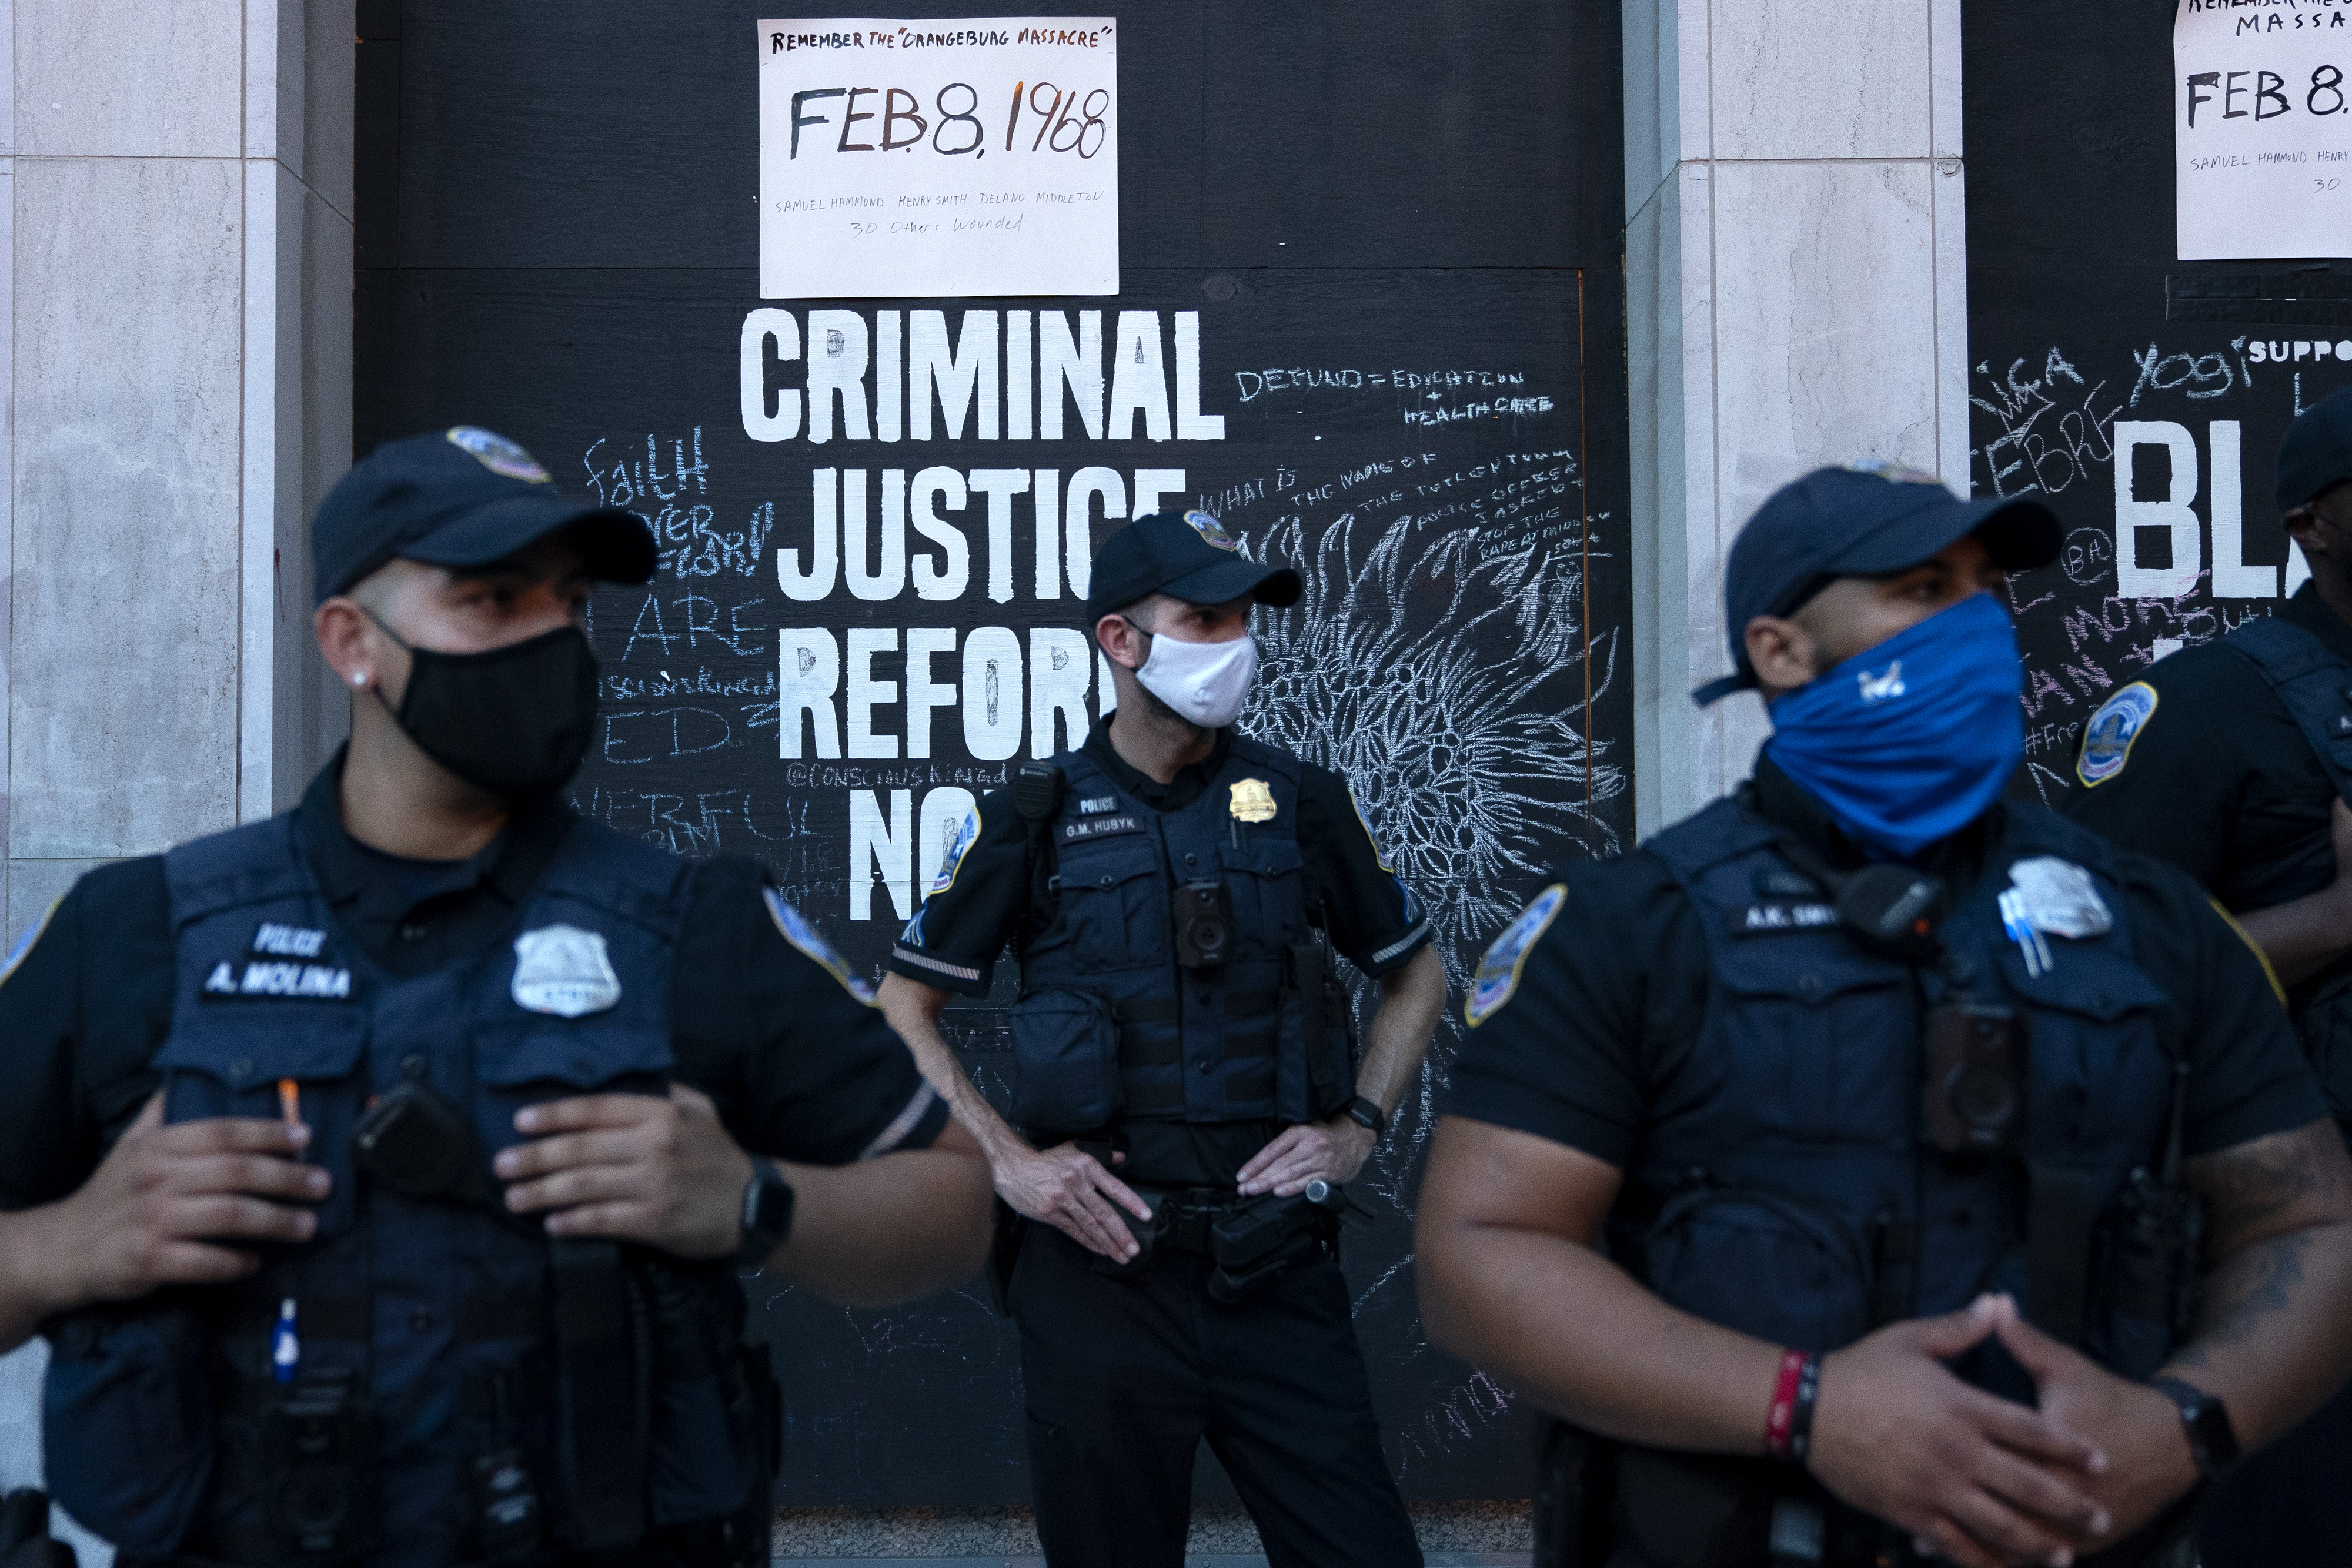 Police officers wearing protective masks stand in front of a criminal justice reform sign during the Republican National Convention in Washington, D.C., on Aug. 27, 2020. (Stefani Reynolds—Bloomberg/Getty Images)